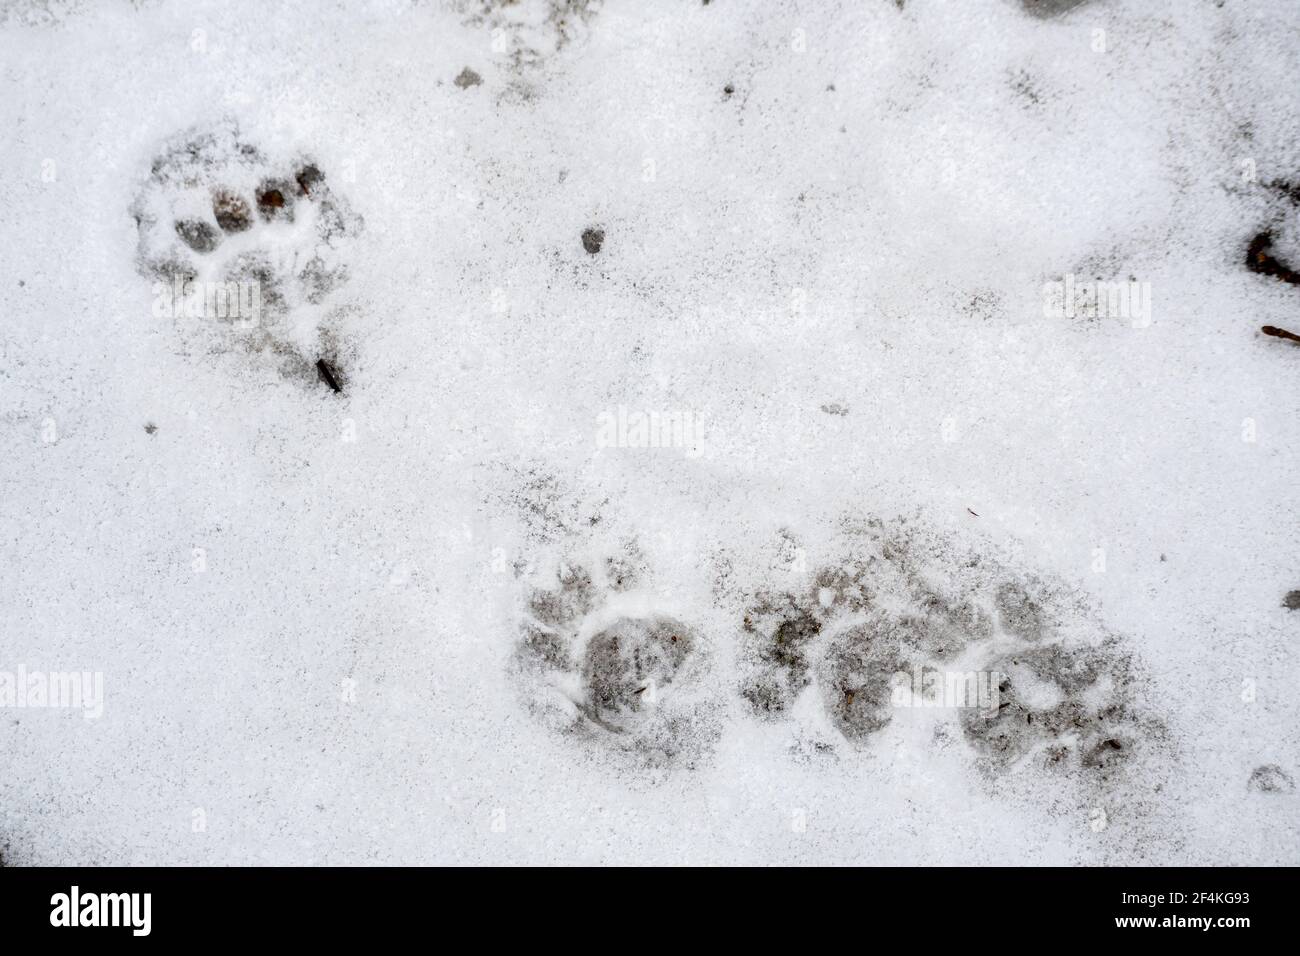 Badger footprint in the snow in winter or spring in the forest or woods, close up Stock Photo